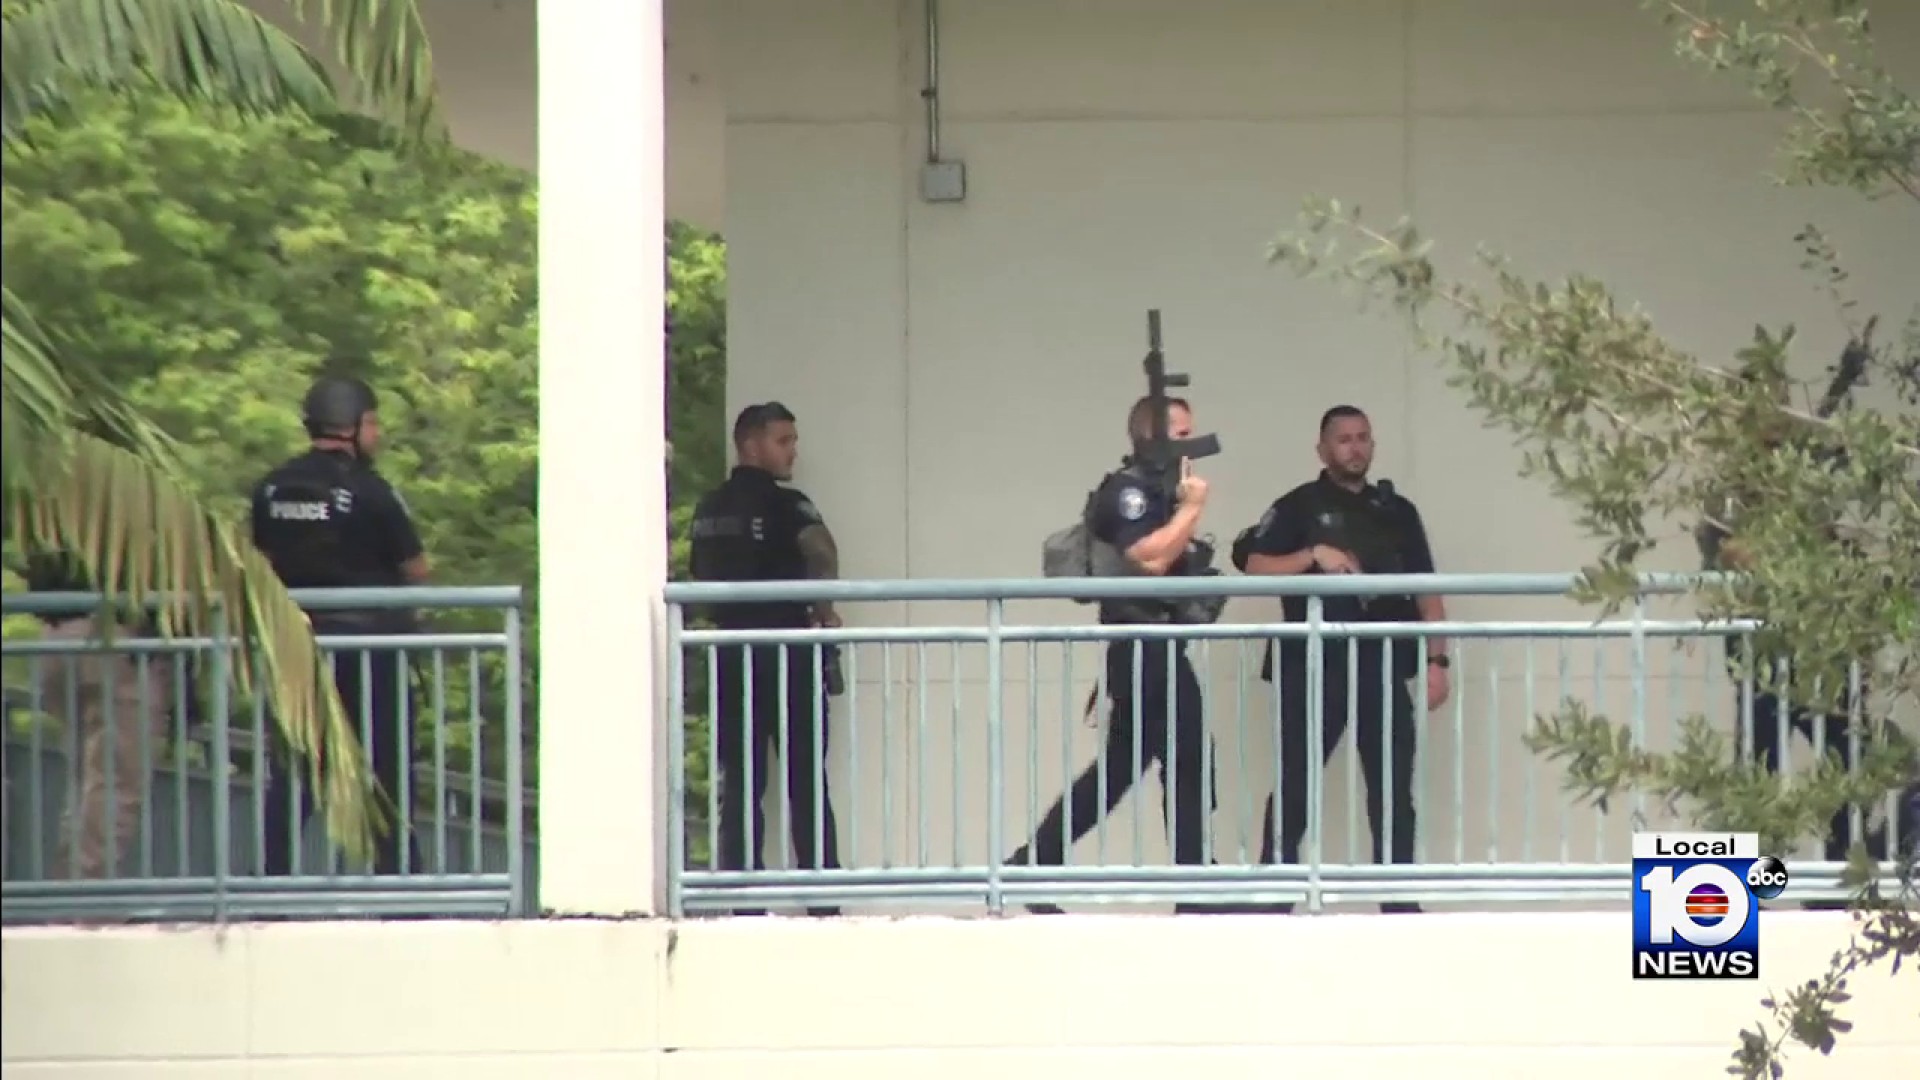 False call' prompts heavy police presence at Hollywood high school